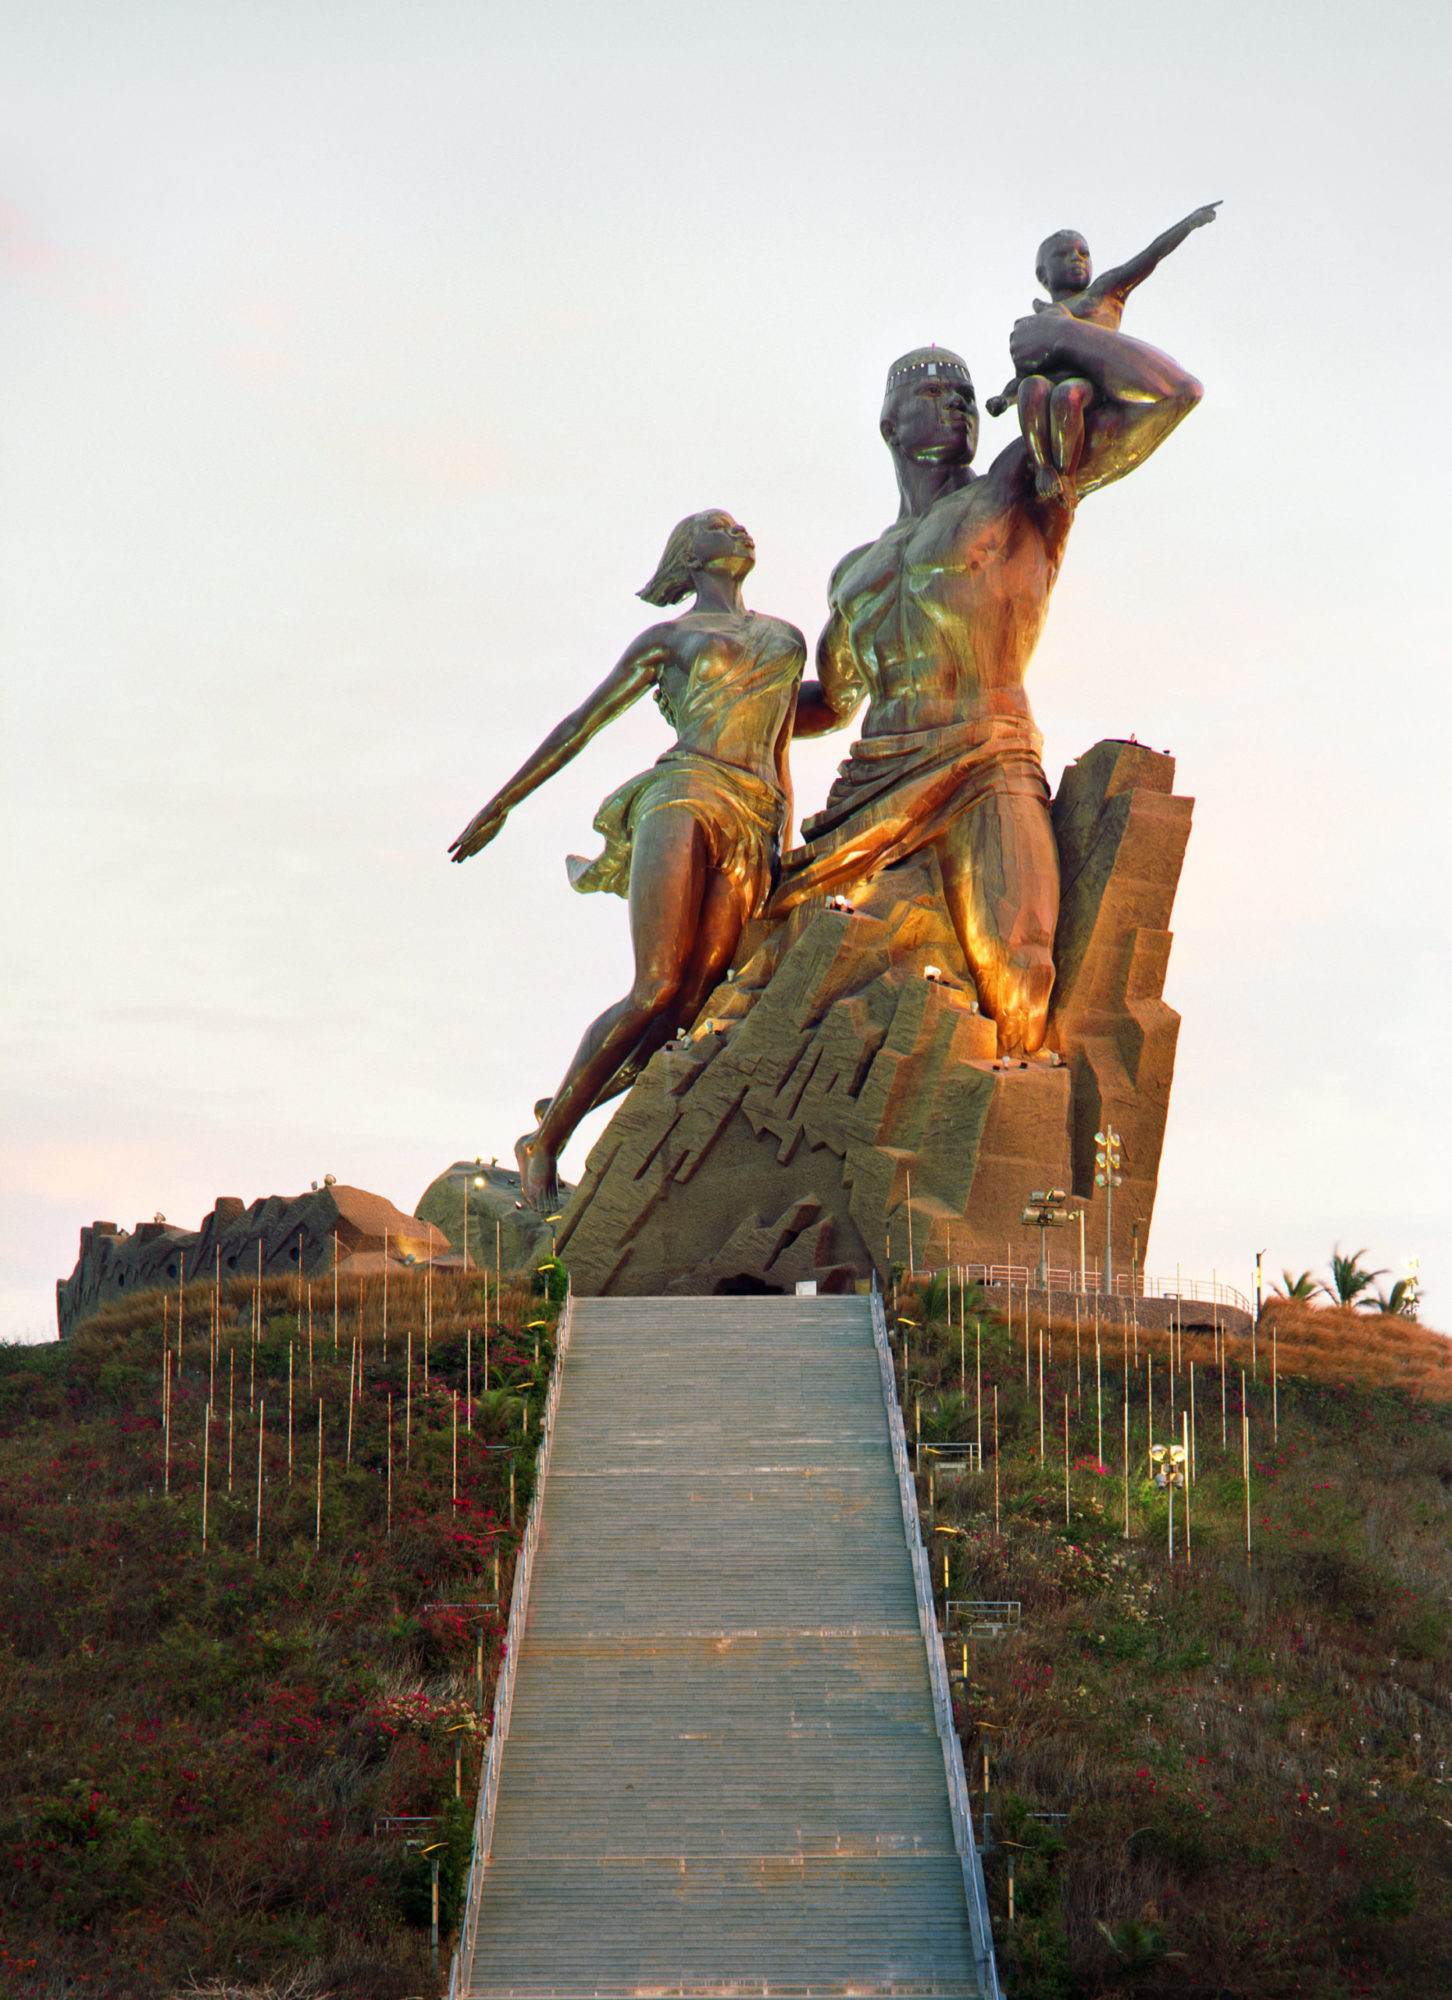 Copper statue atop of grassy hill with ascending stone steps; statue depicts larger-than-life figures of man with child upon his shoulders and a woman, their clothing blowing in wind, staring off into distance